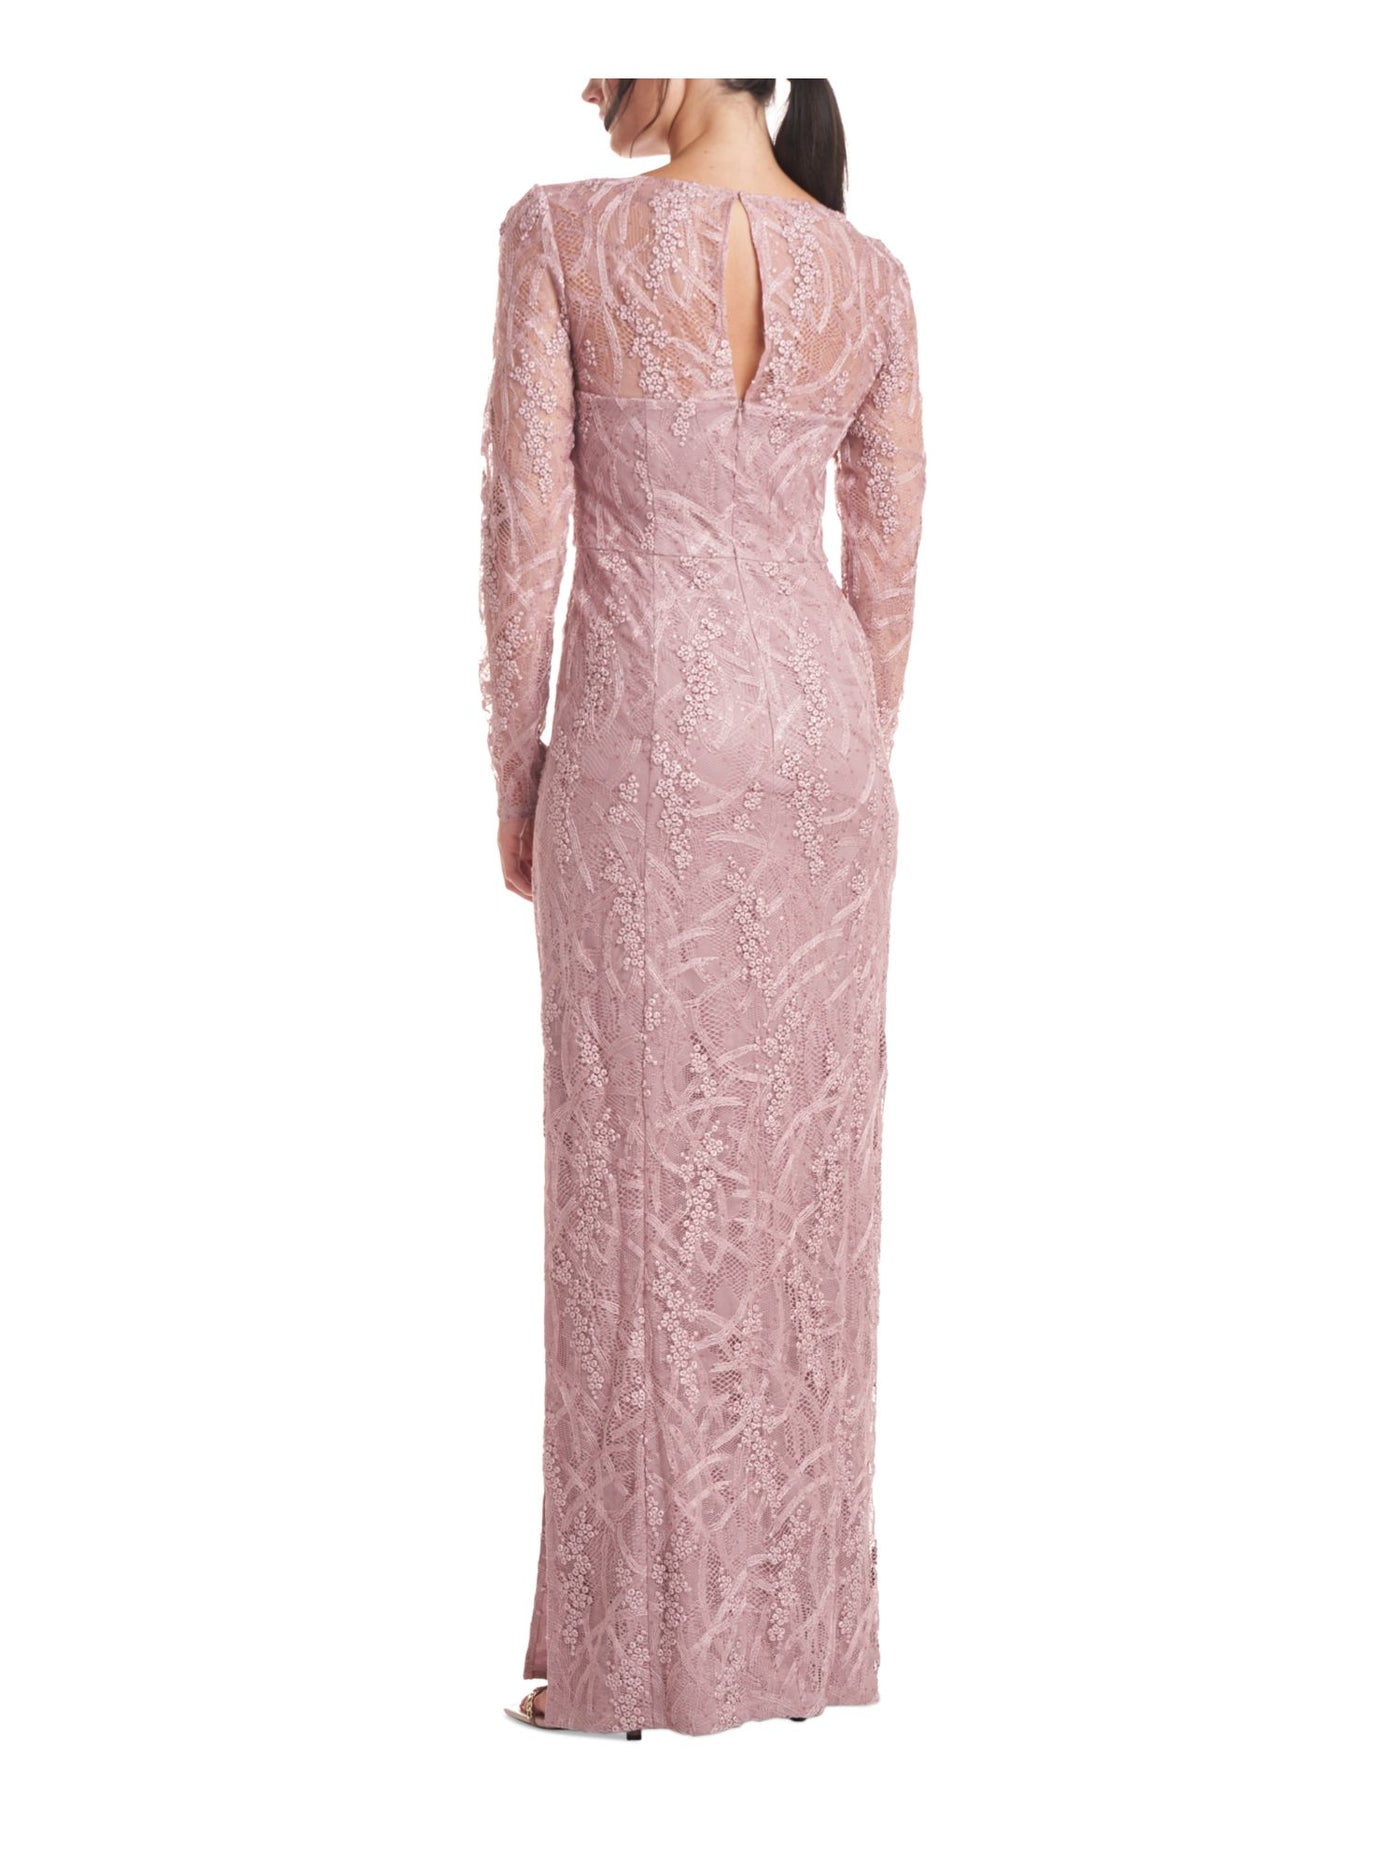 JS COLLECTIONS Womens Pink Embroidered Zippered Sequined Lined Long Sleeve Square Neck Full-Length Evening Sheath Dress 6